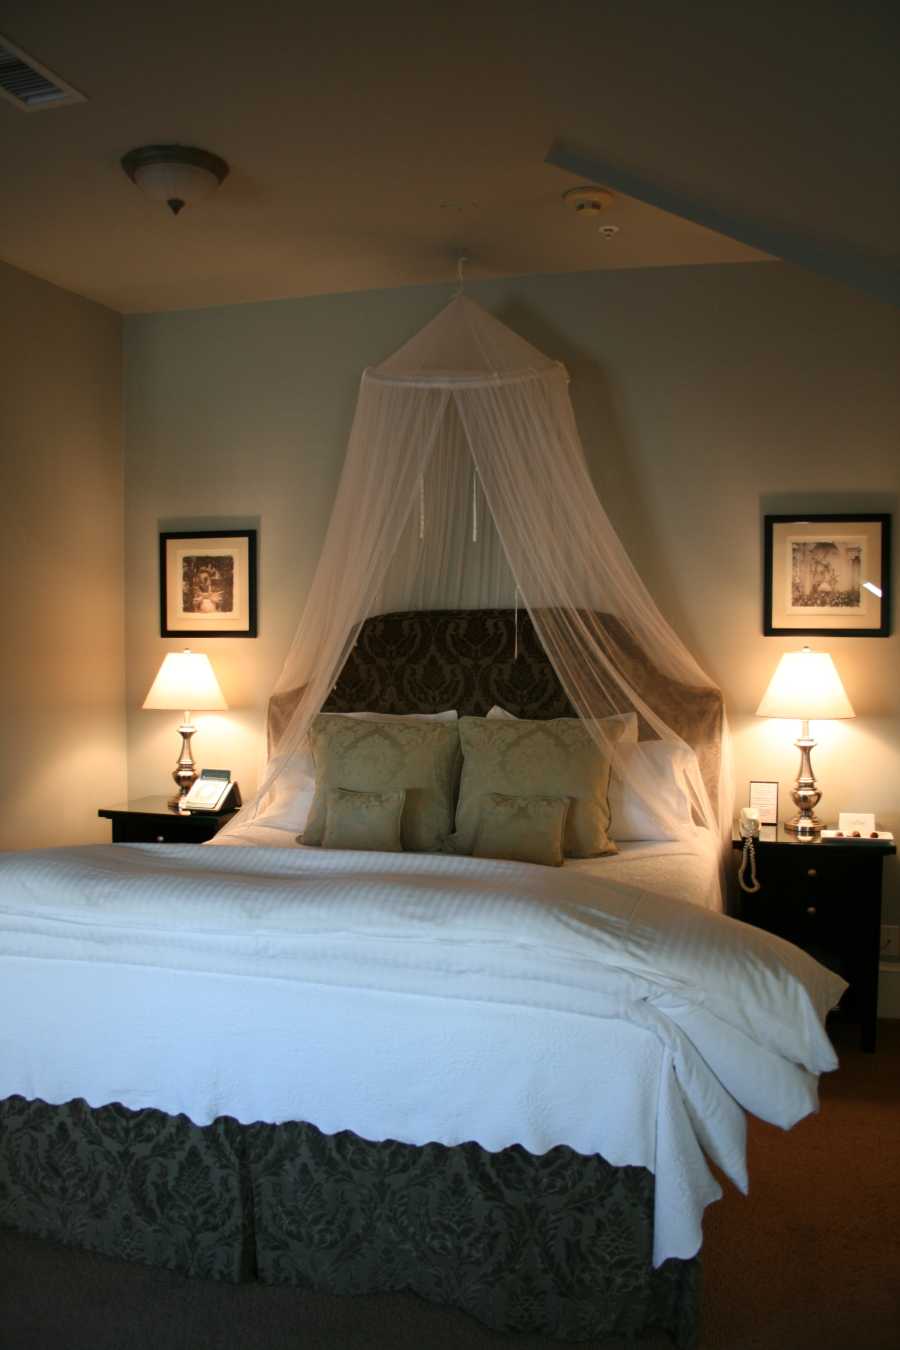 Guest bedroom at 1801 First bed and breakfast inn in Napa Valley